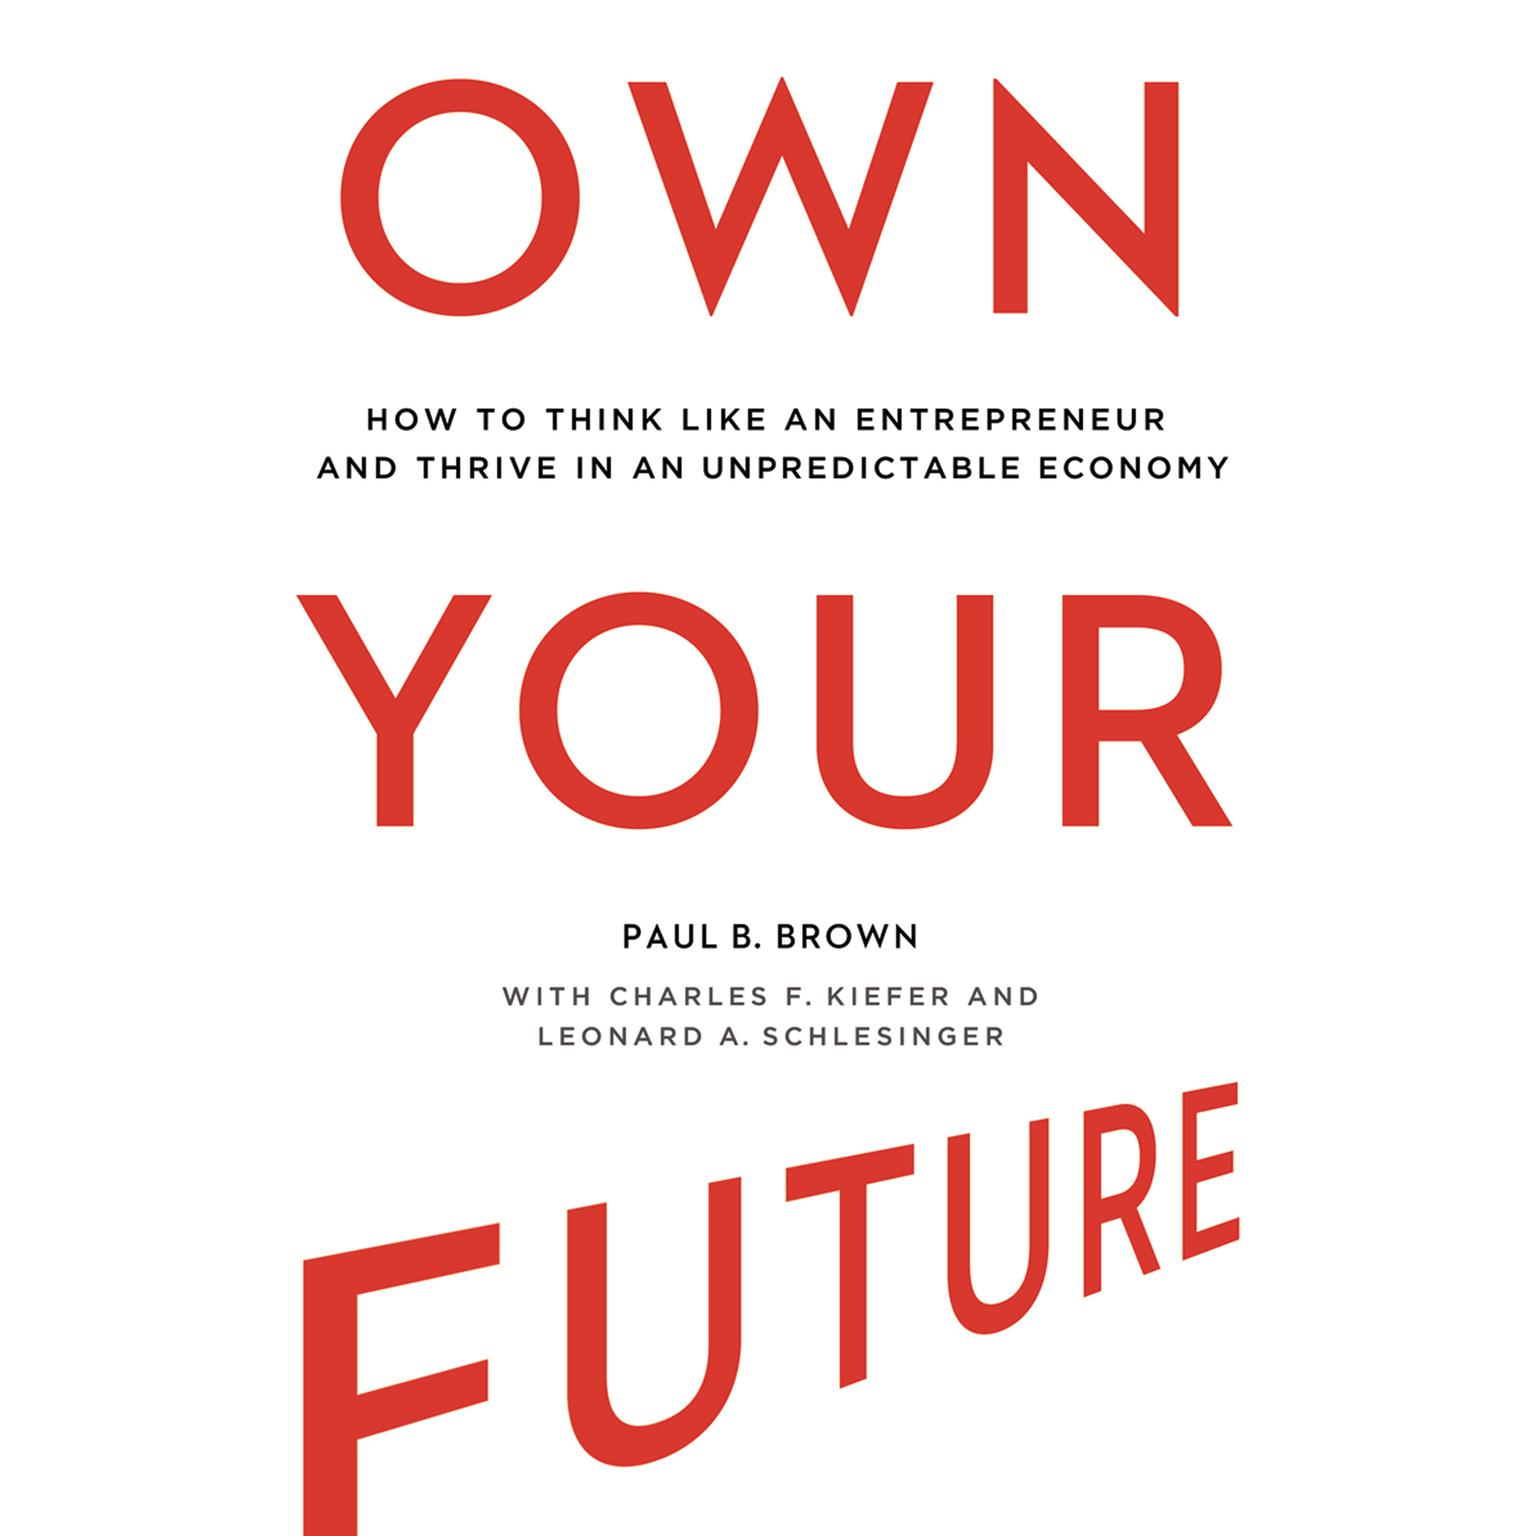 Own Your Future: How to Think Like an Entrepreneur and Thrive in an Unpredictable Economy Audiobook, by Paul B. Brown